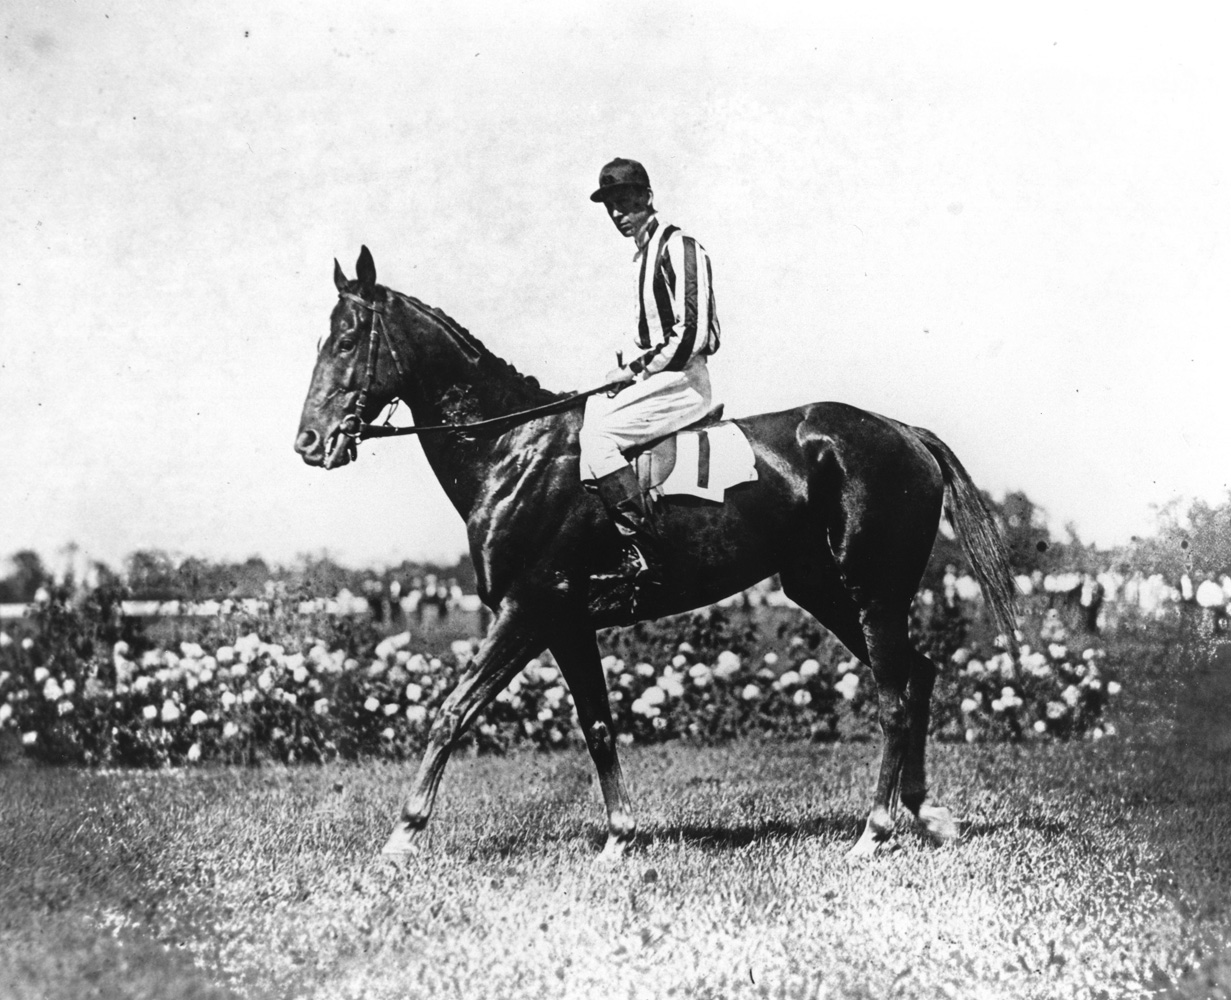 Fairmount with J. Dallett Byers up (Keeneland Library Cook Collection/Museum Collection)